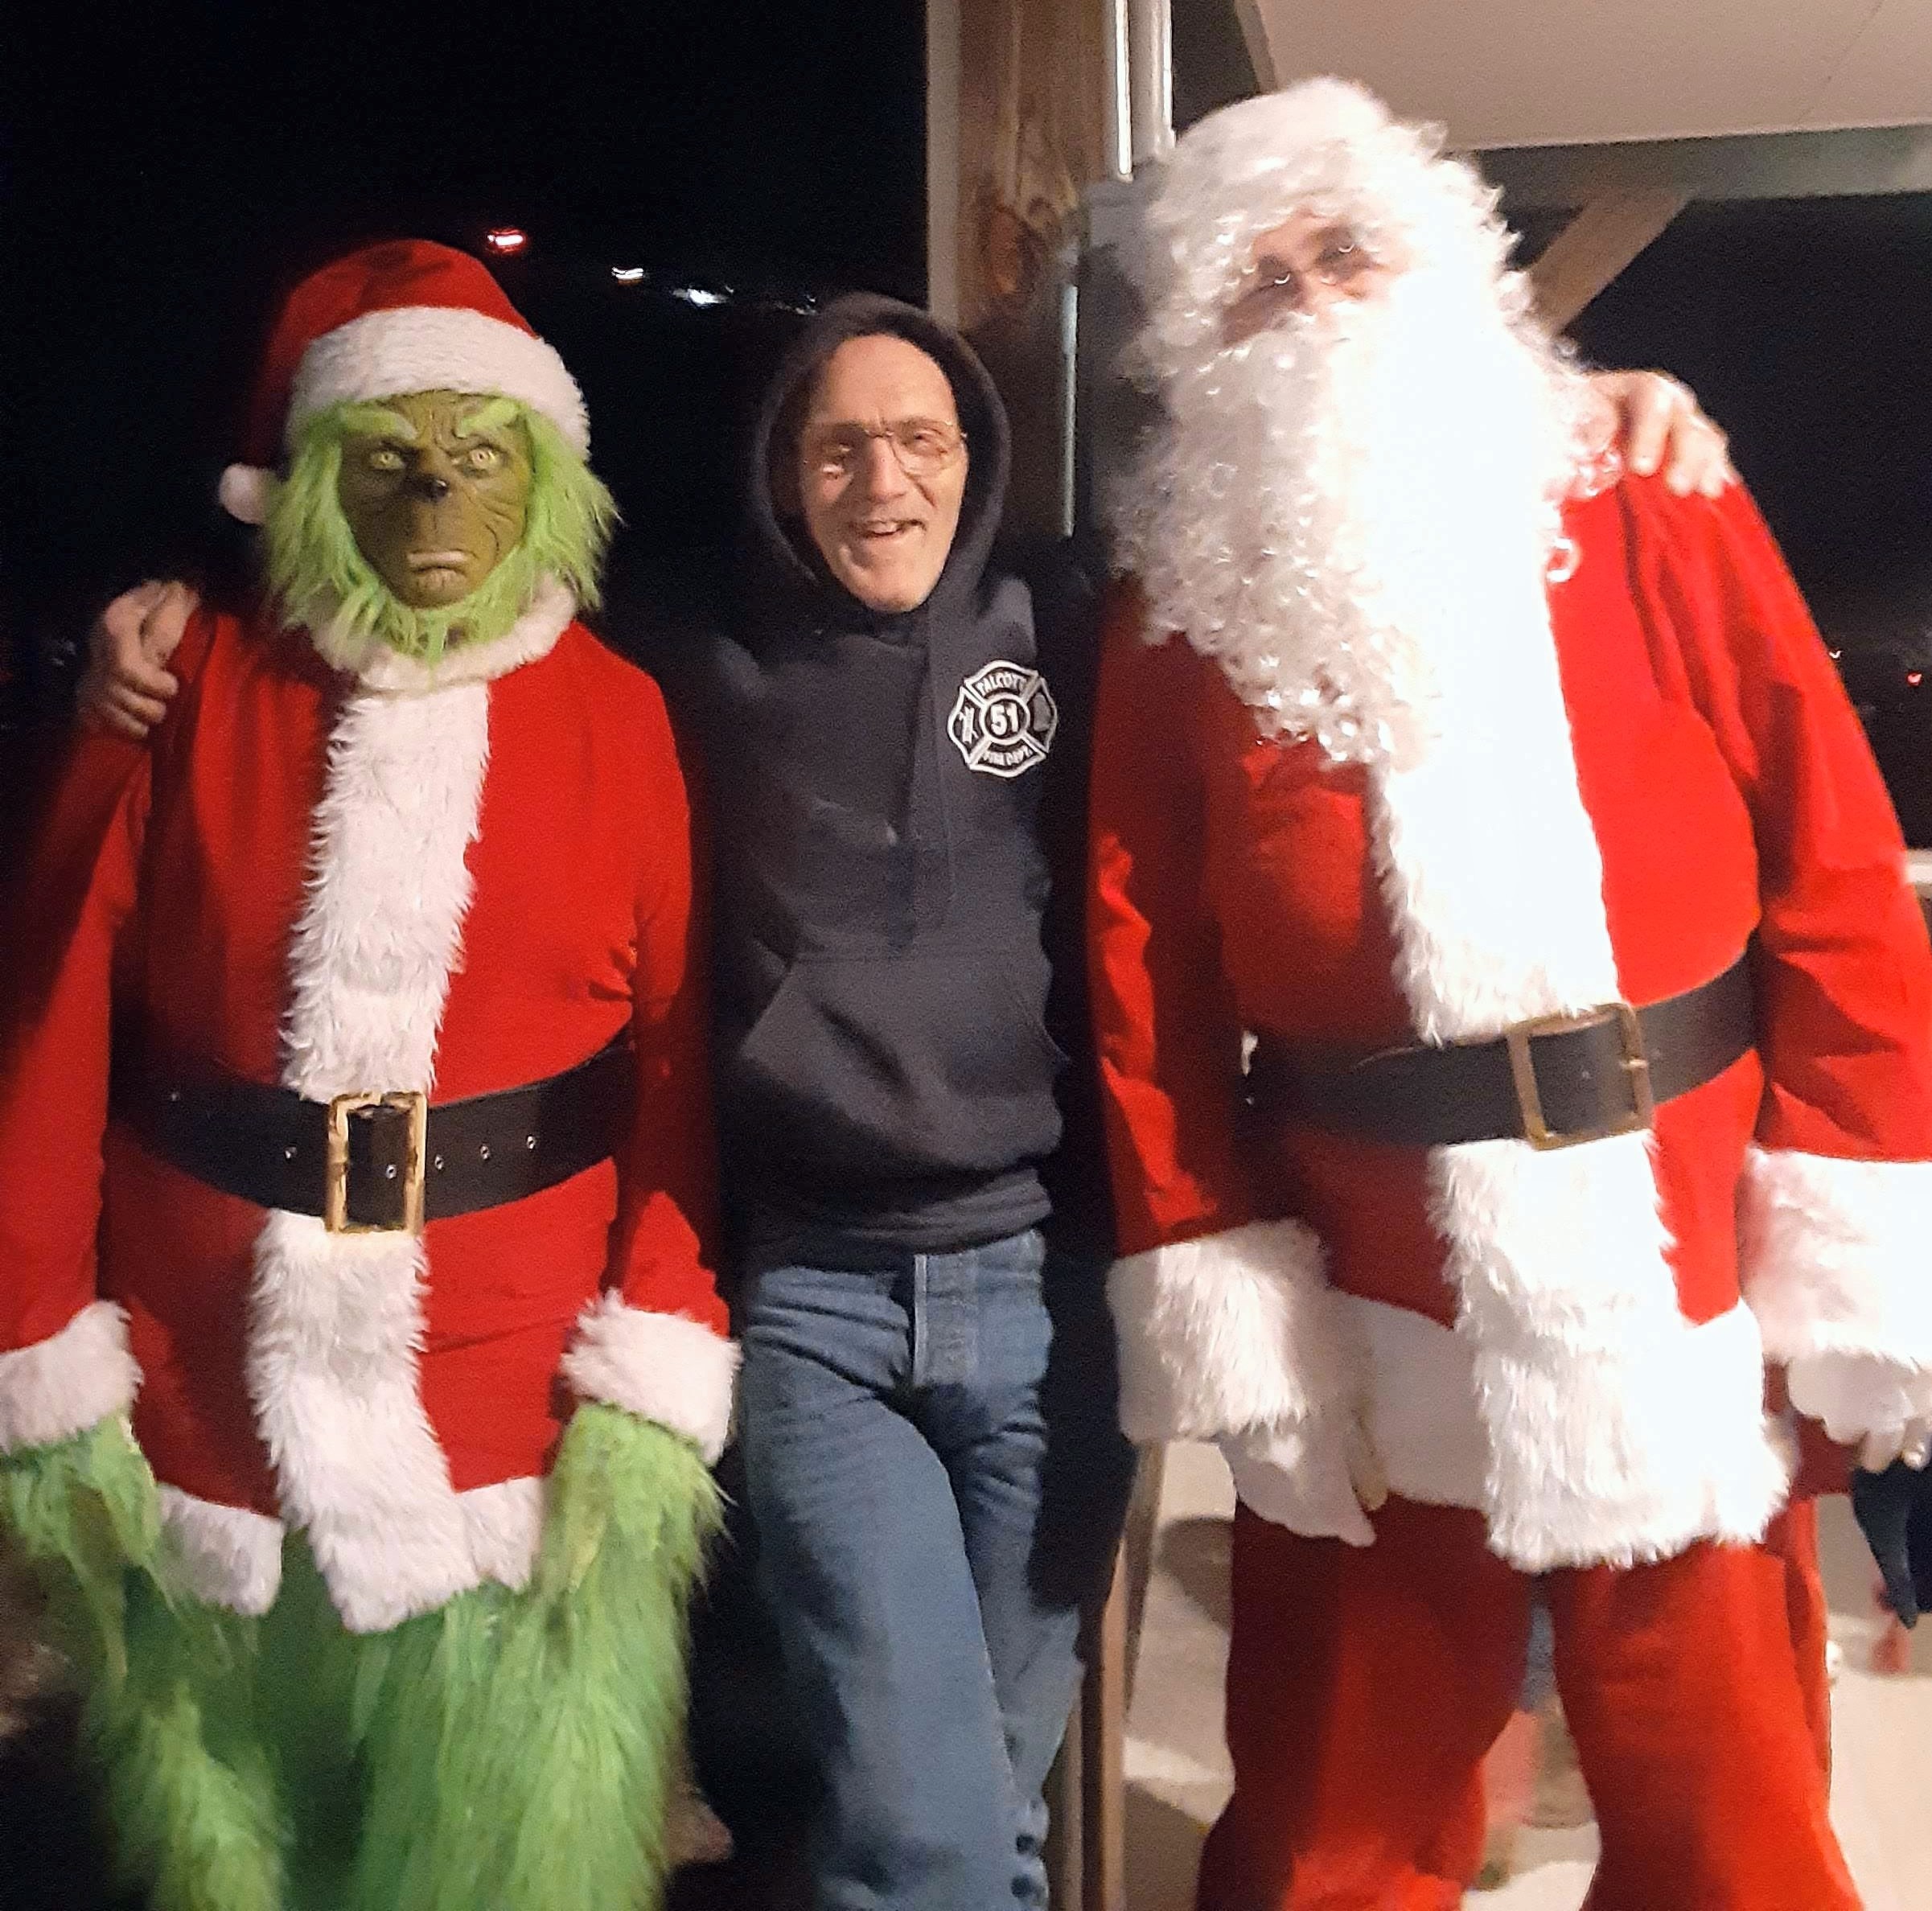 Fire Chief Bill Costco mitis stands between Santa and the Grinch